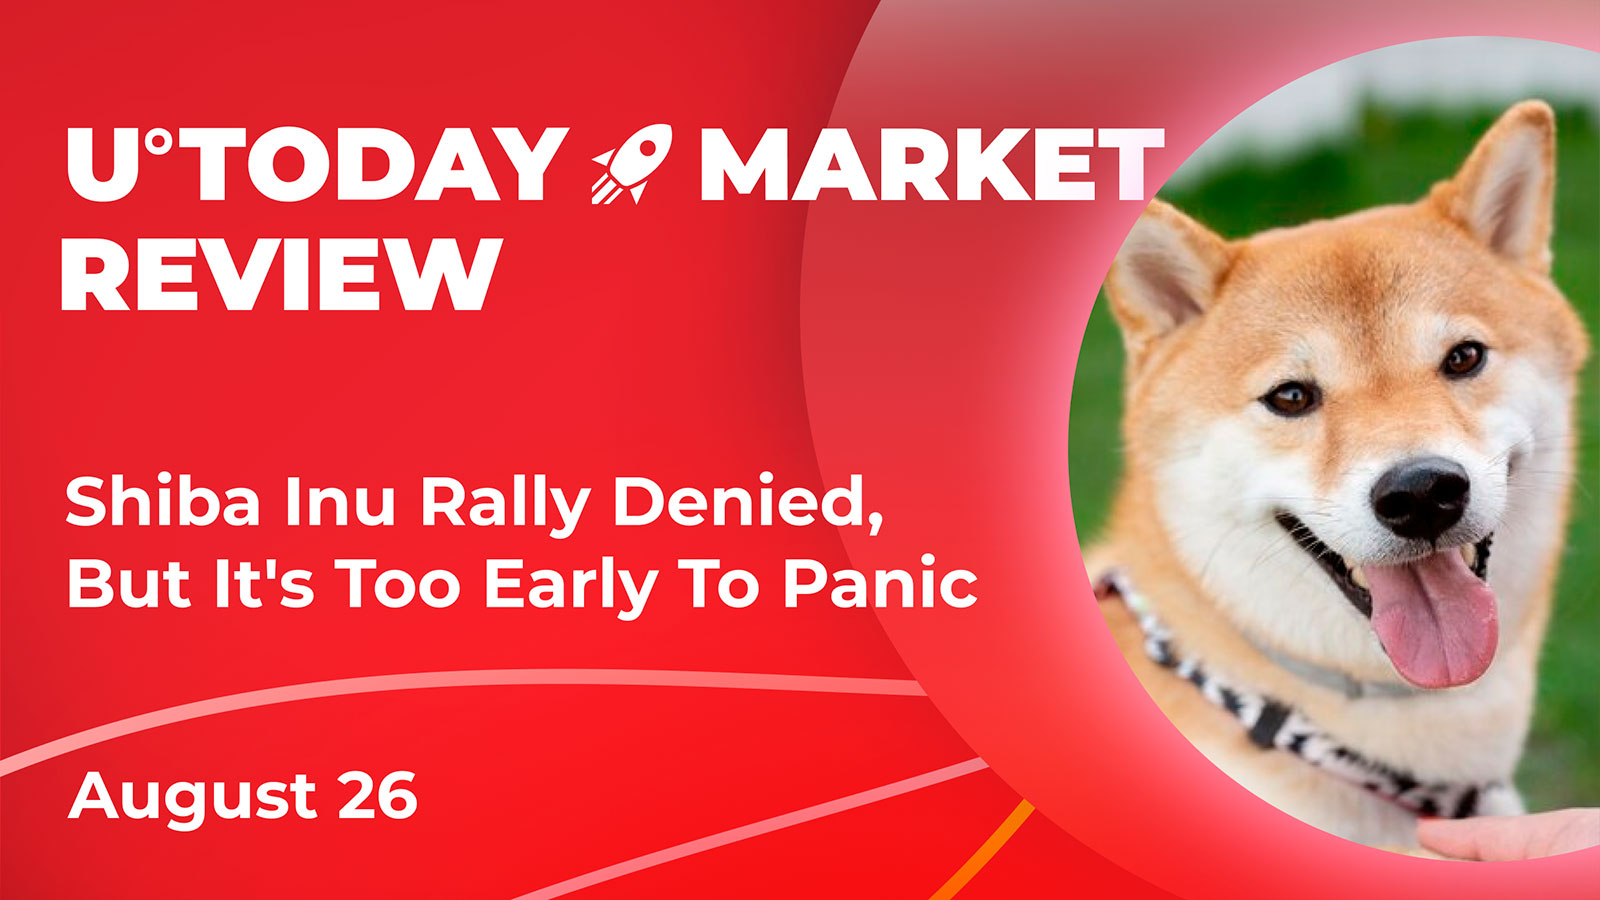 Shiba Inu Rally Denied, But It's Too Early To Panic: Crypto Market Review, August 26